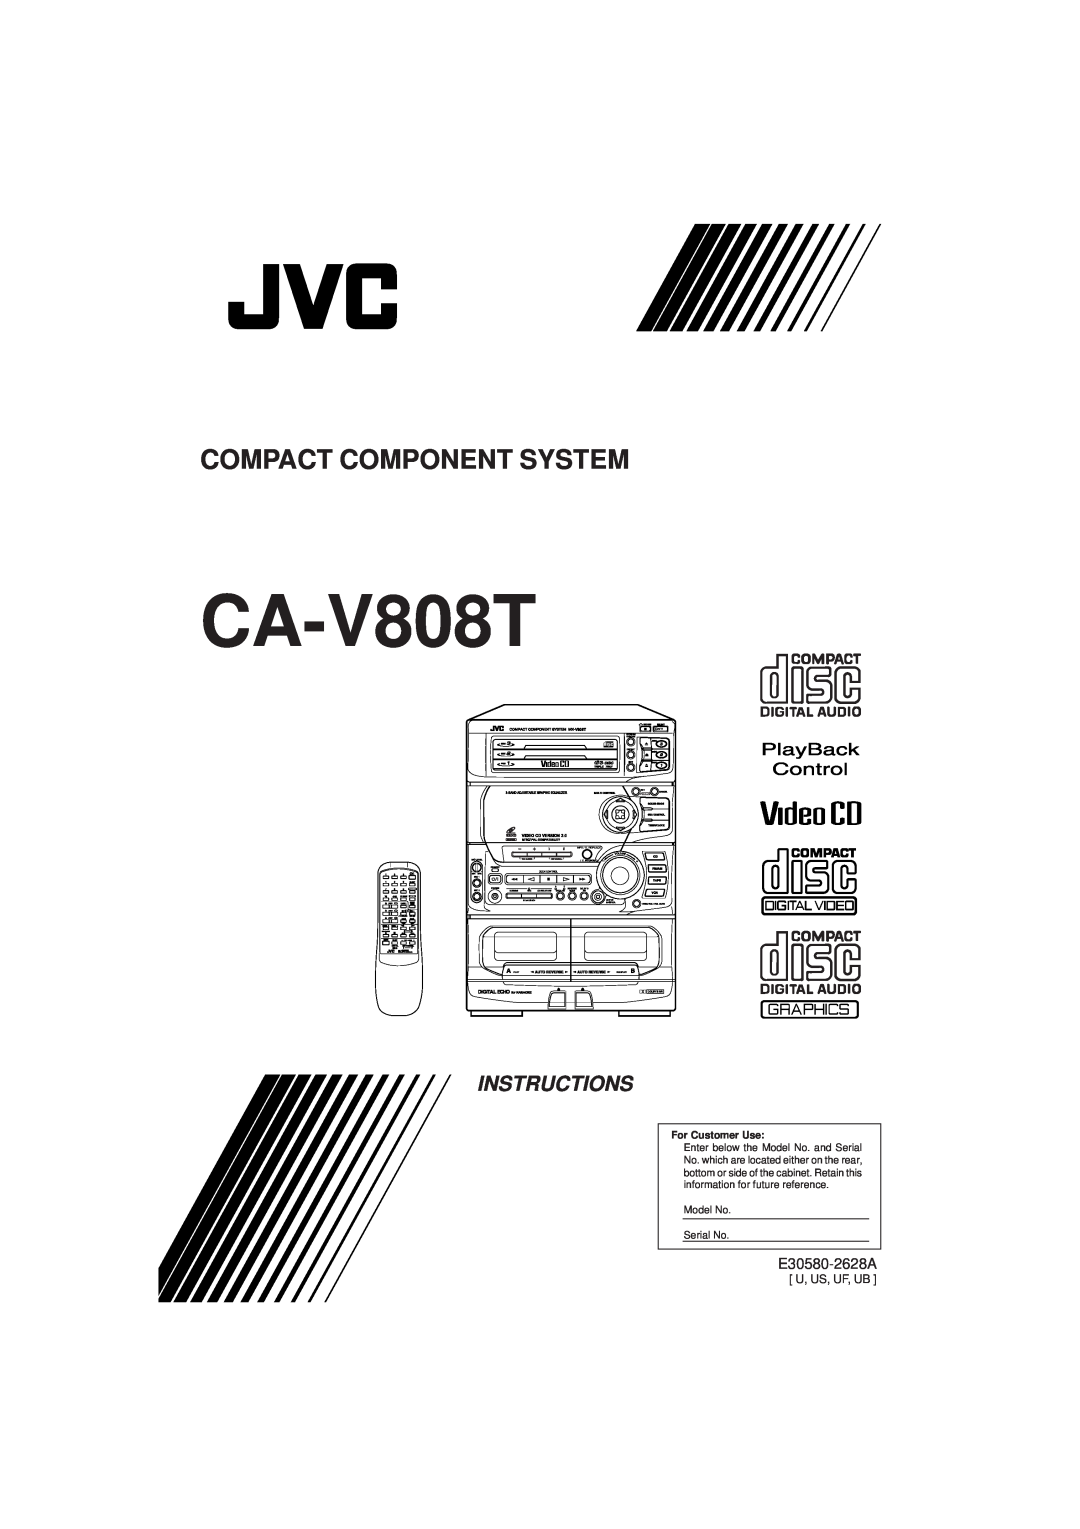 JVC CA-V808T manual Instructions, Compact Component System, E30580-2628A, For Customer Use, Mpx / V. Replace V. Masking 